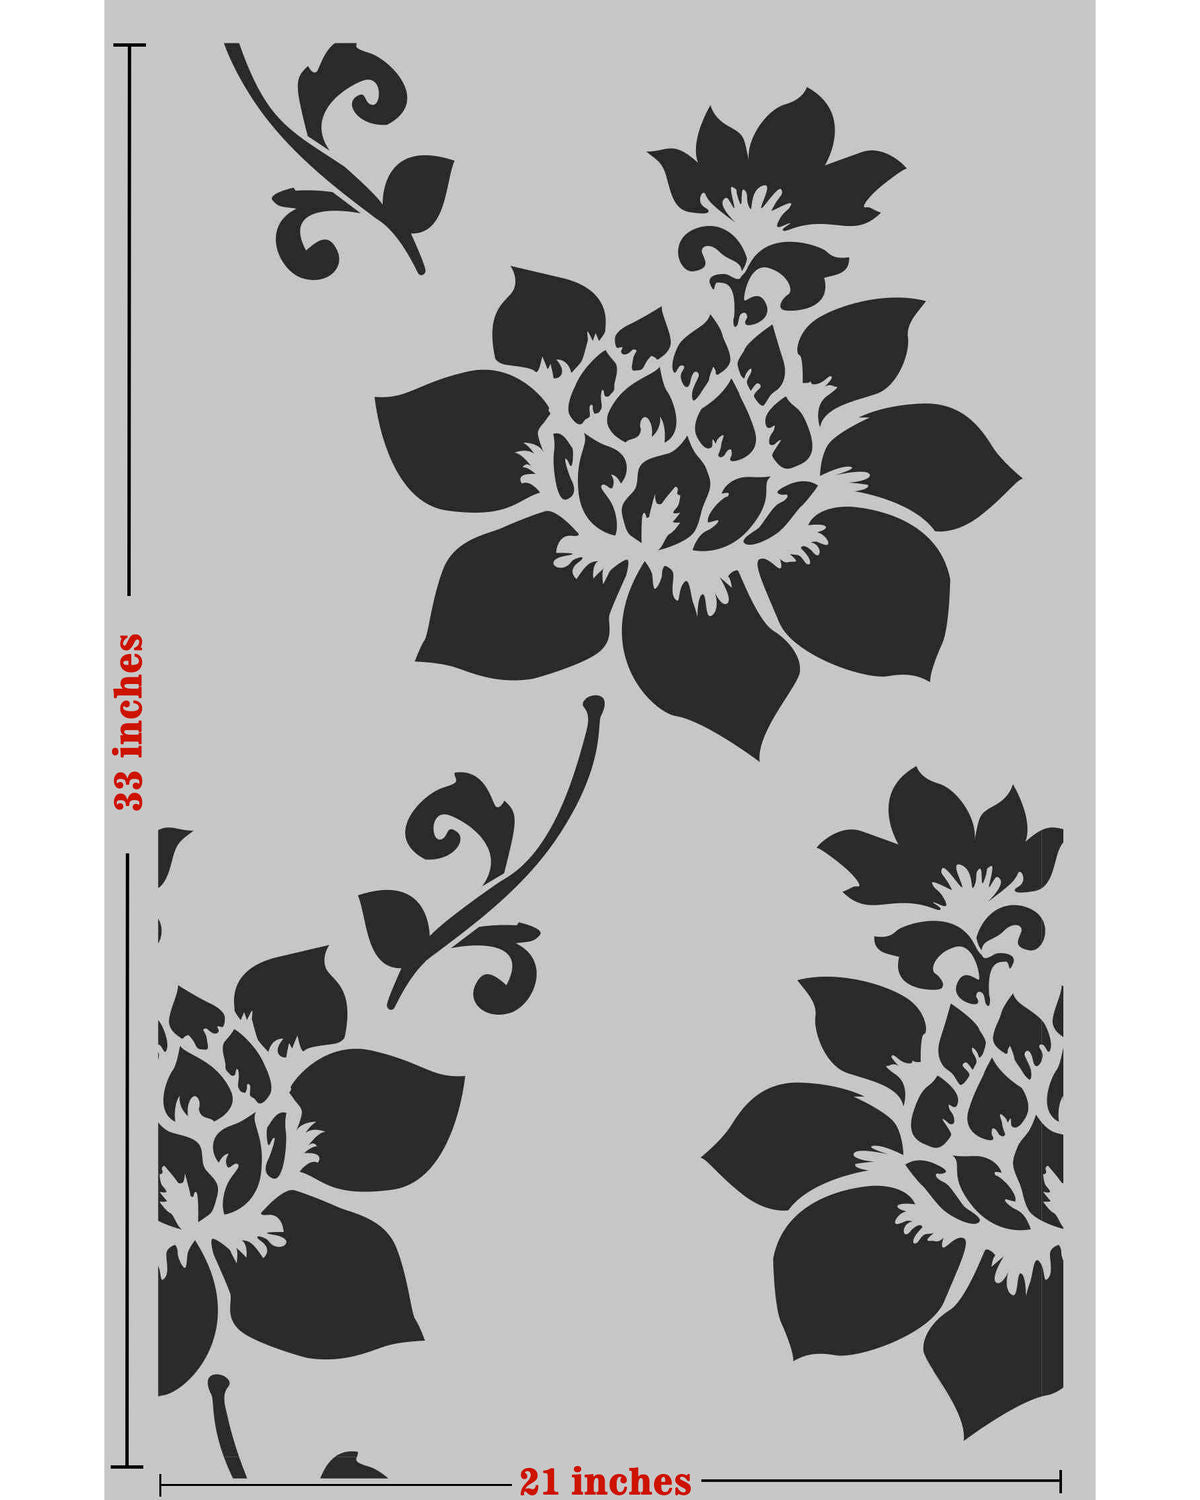 Large Floral Stencils Reusable Wall Pattern for Decor Art Craft